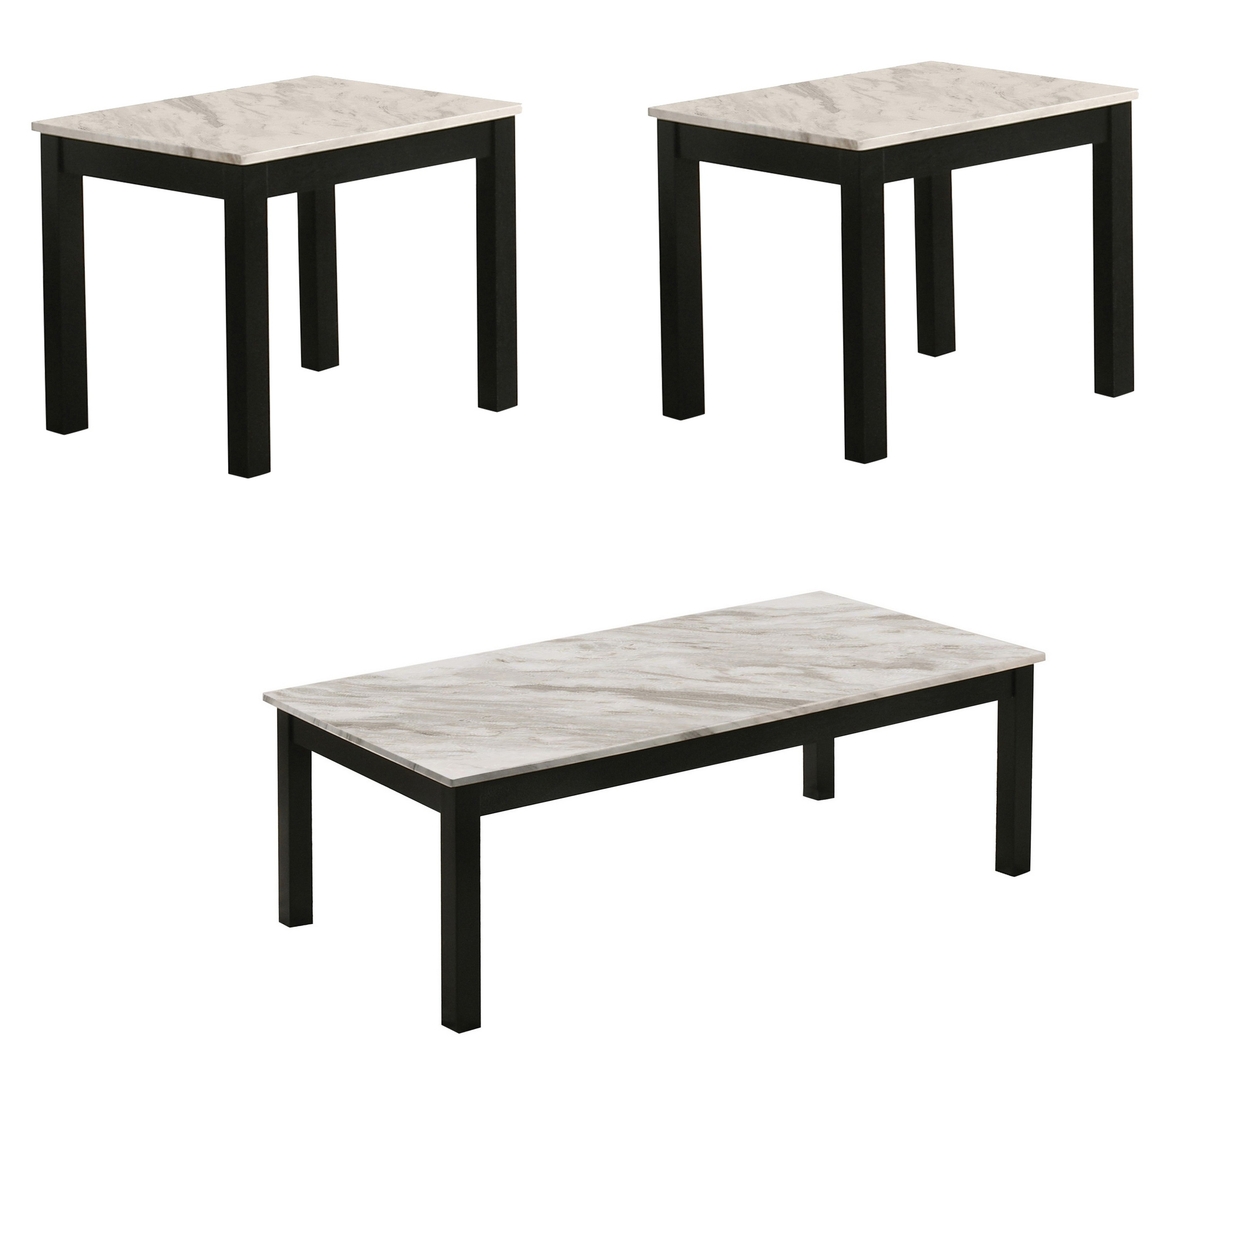 3 Piece Coffee Table And End Table Set, Faux Marble Surface, Black Legs- Saltoro Sherpi